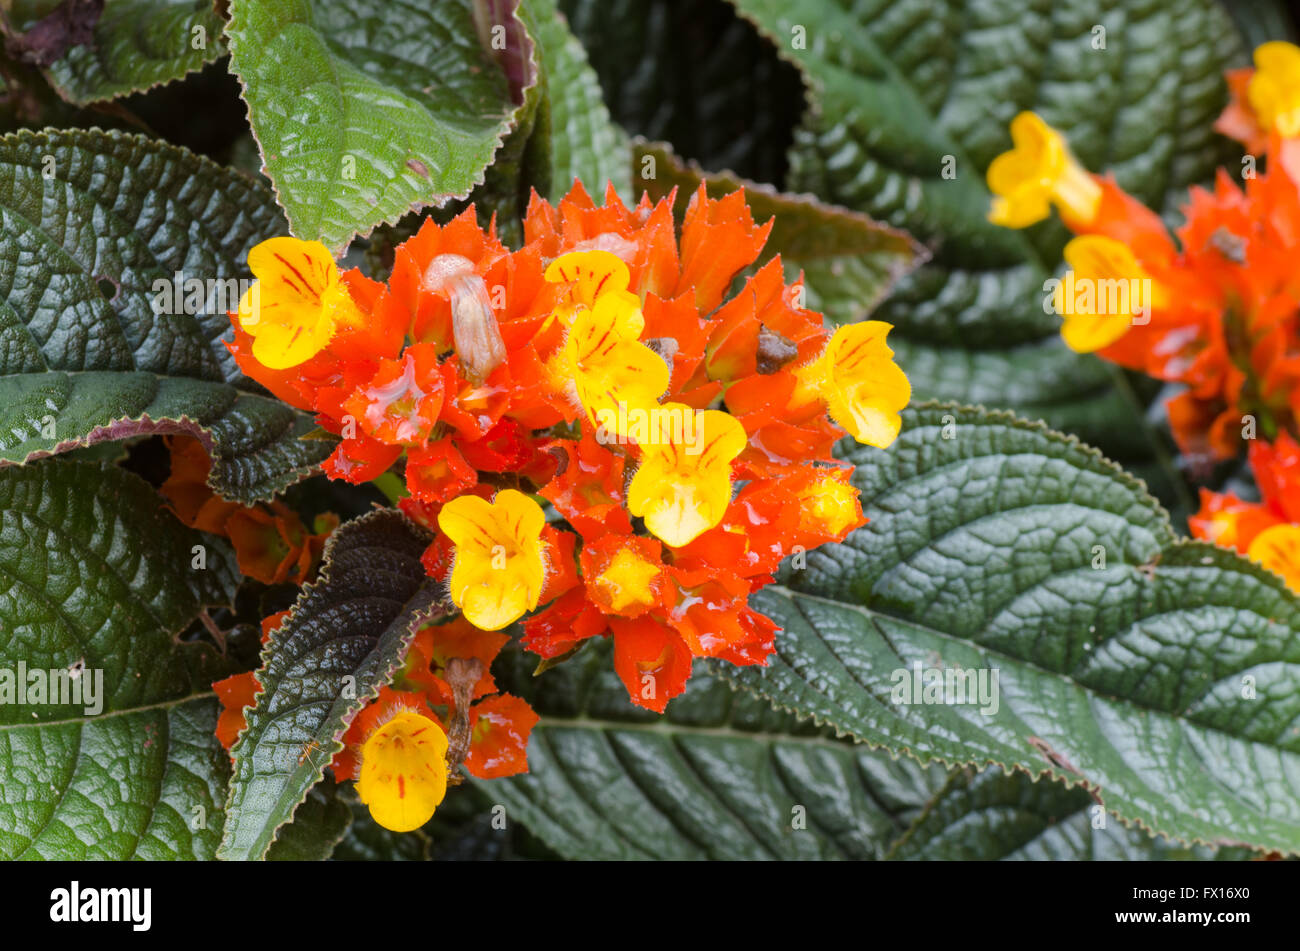 Red Episcia or Flame violet flower Stock Photo